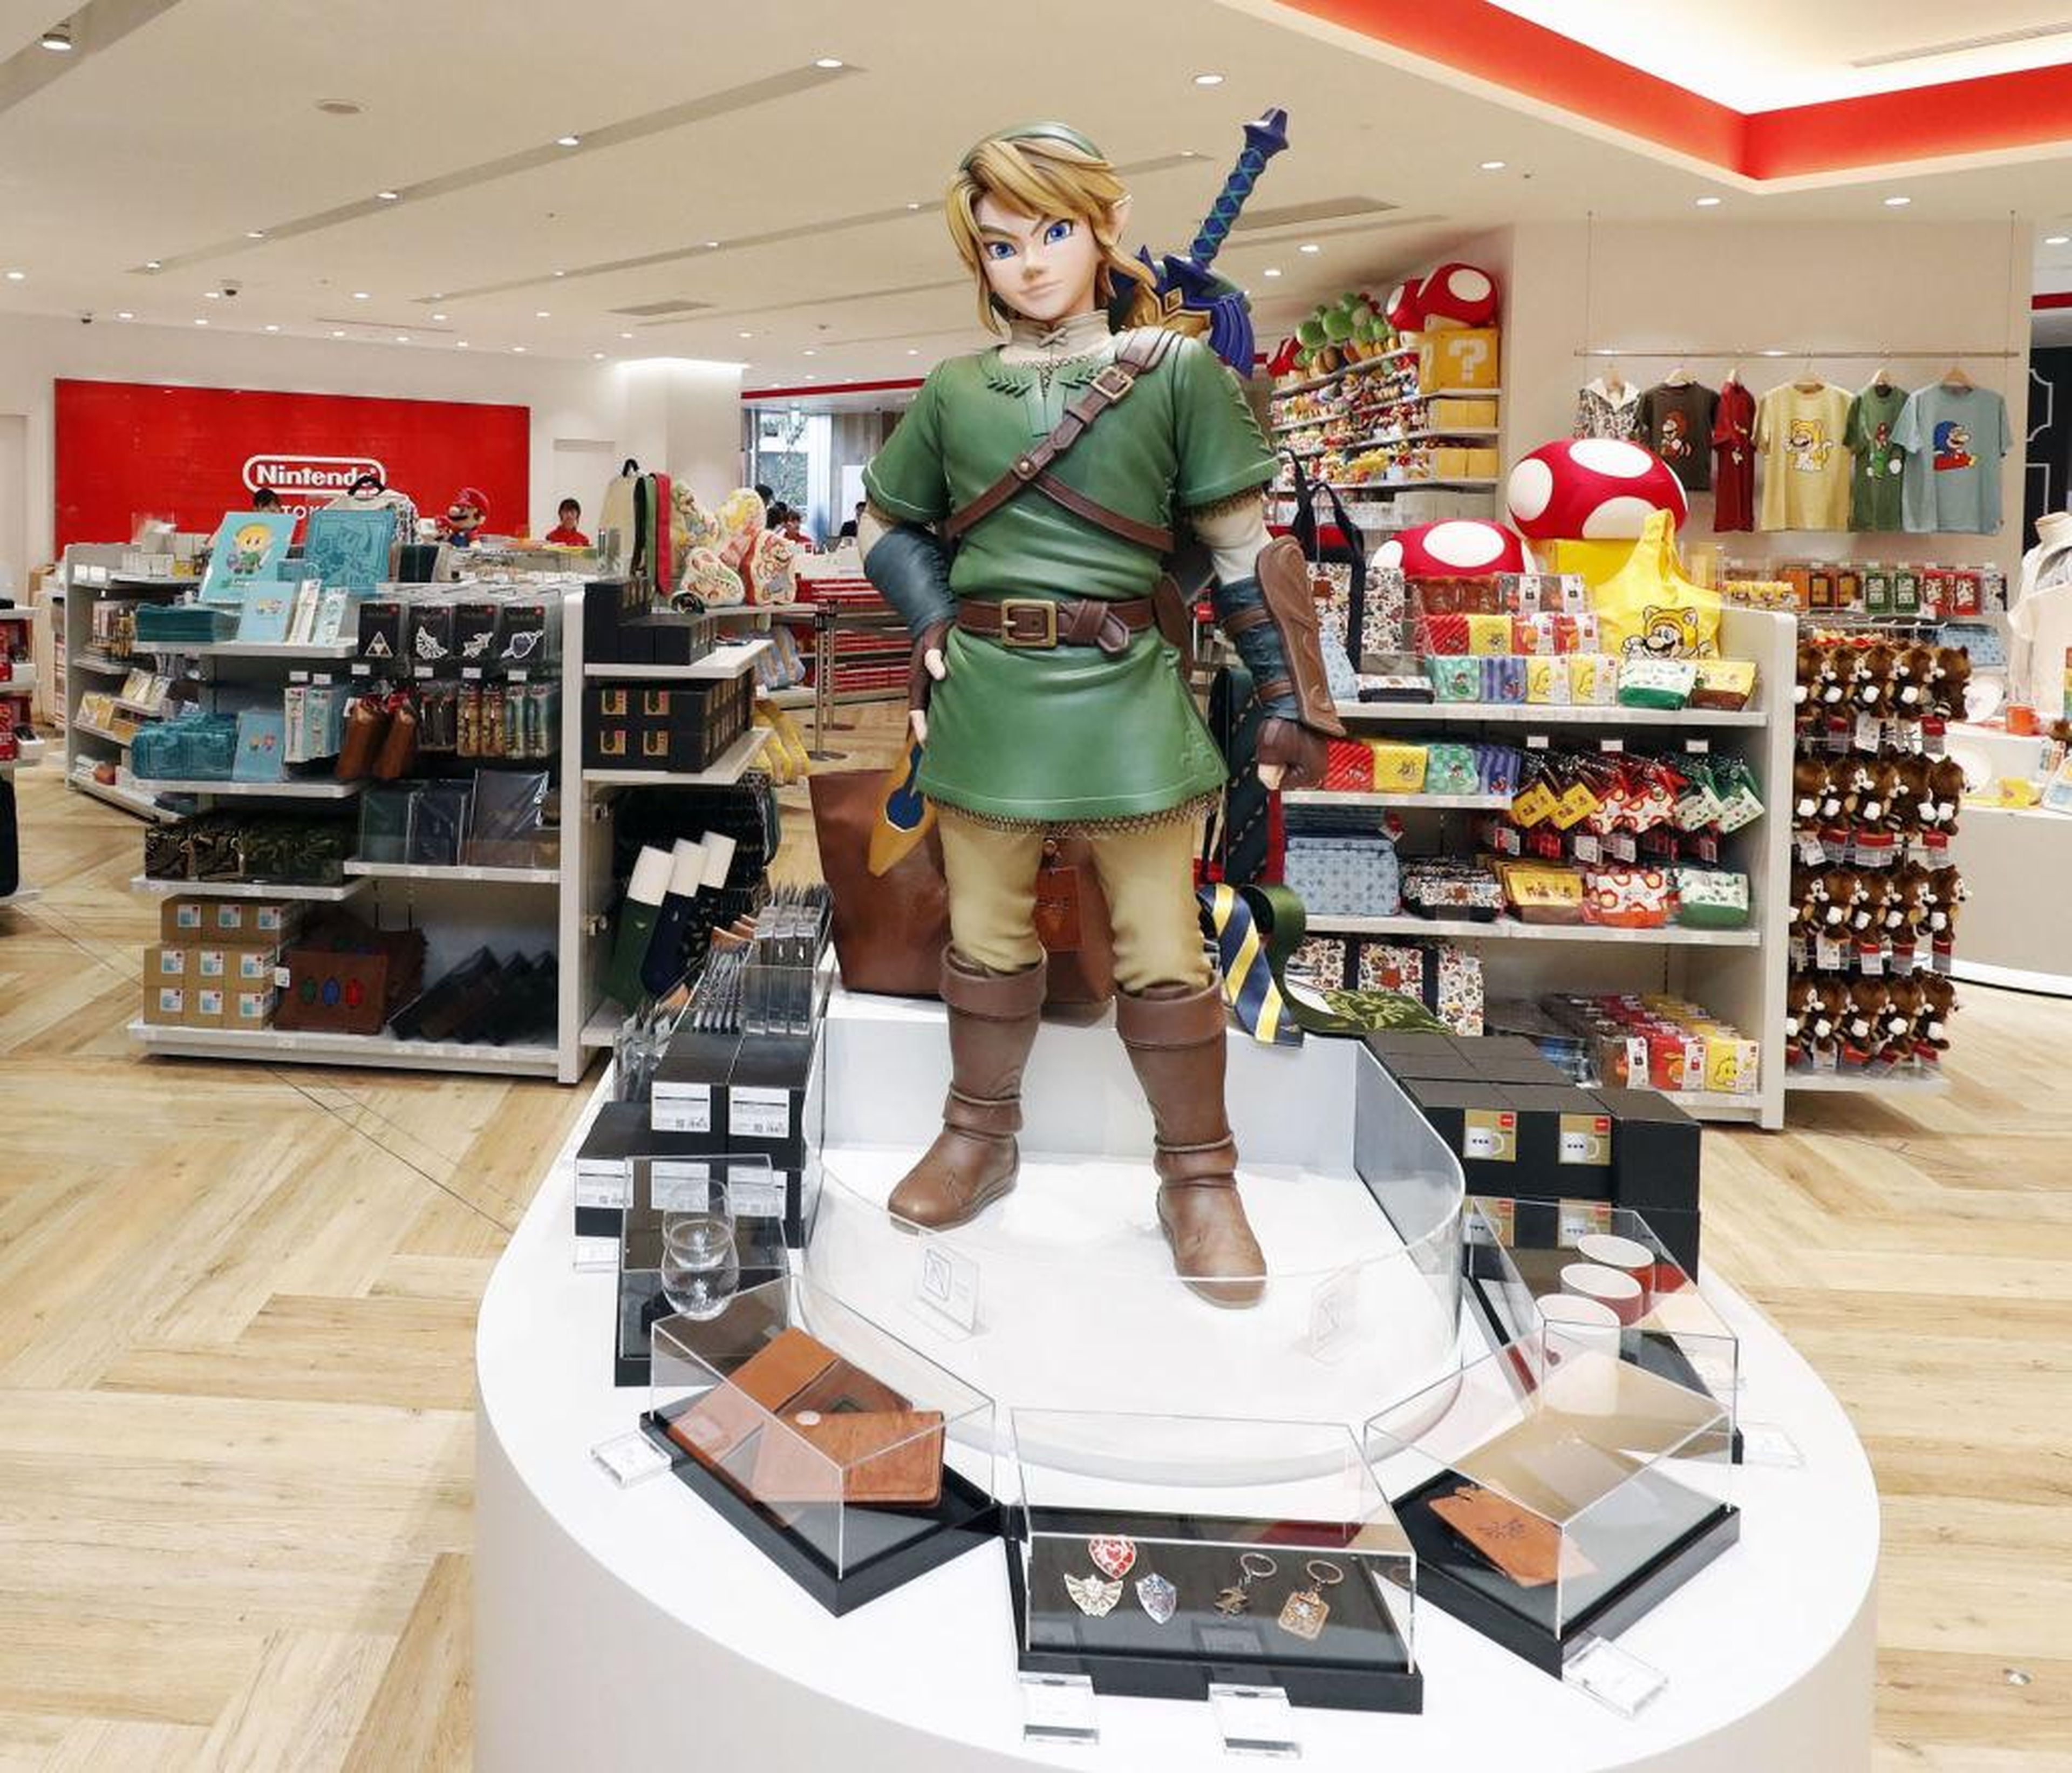 ... while Nintendo's biggest franchises have dedicated displays, like this "Legend of Zelda" stand with a statue of Link, the series' protagonist.